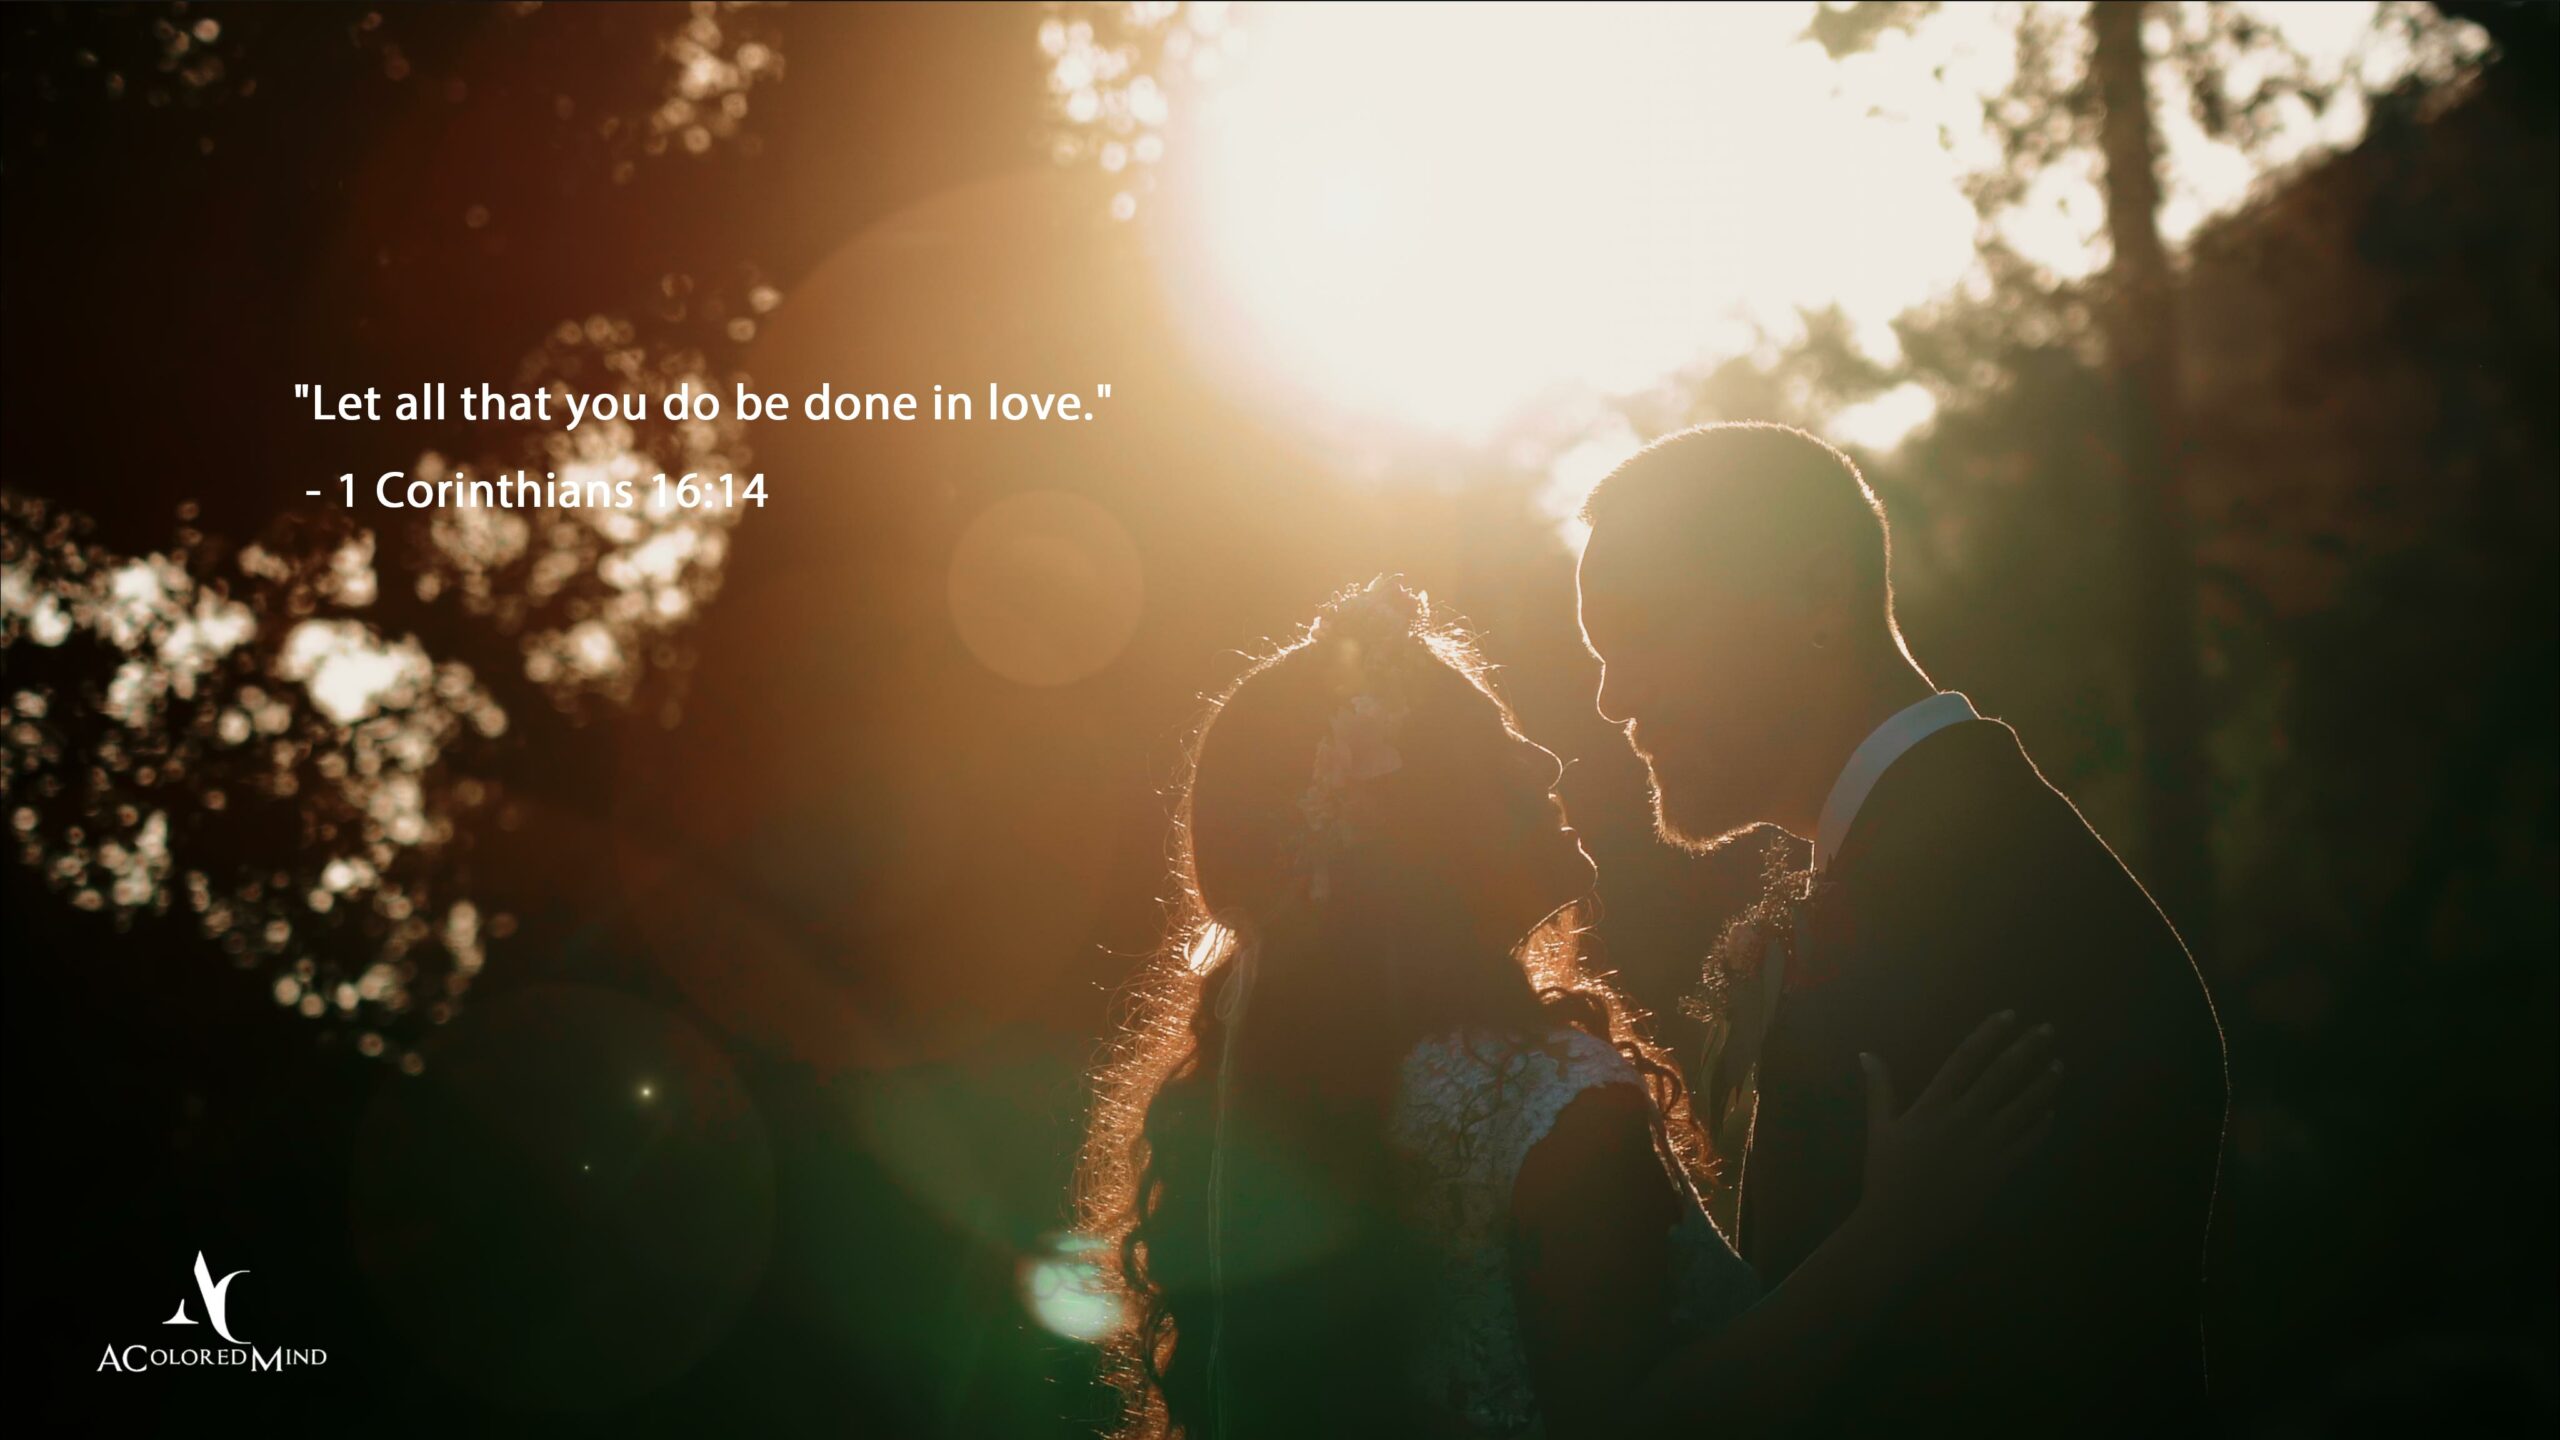 "Let all that you do be done in love." - 1 Corinthians 16:14